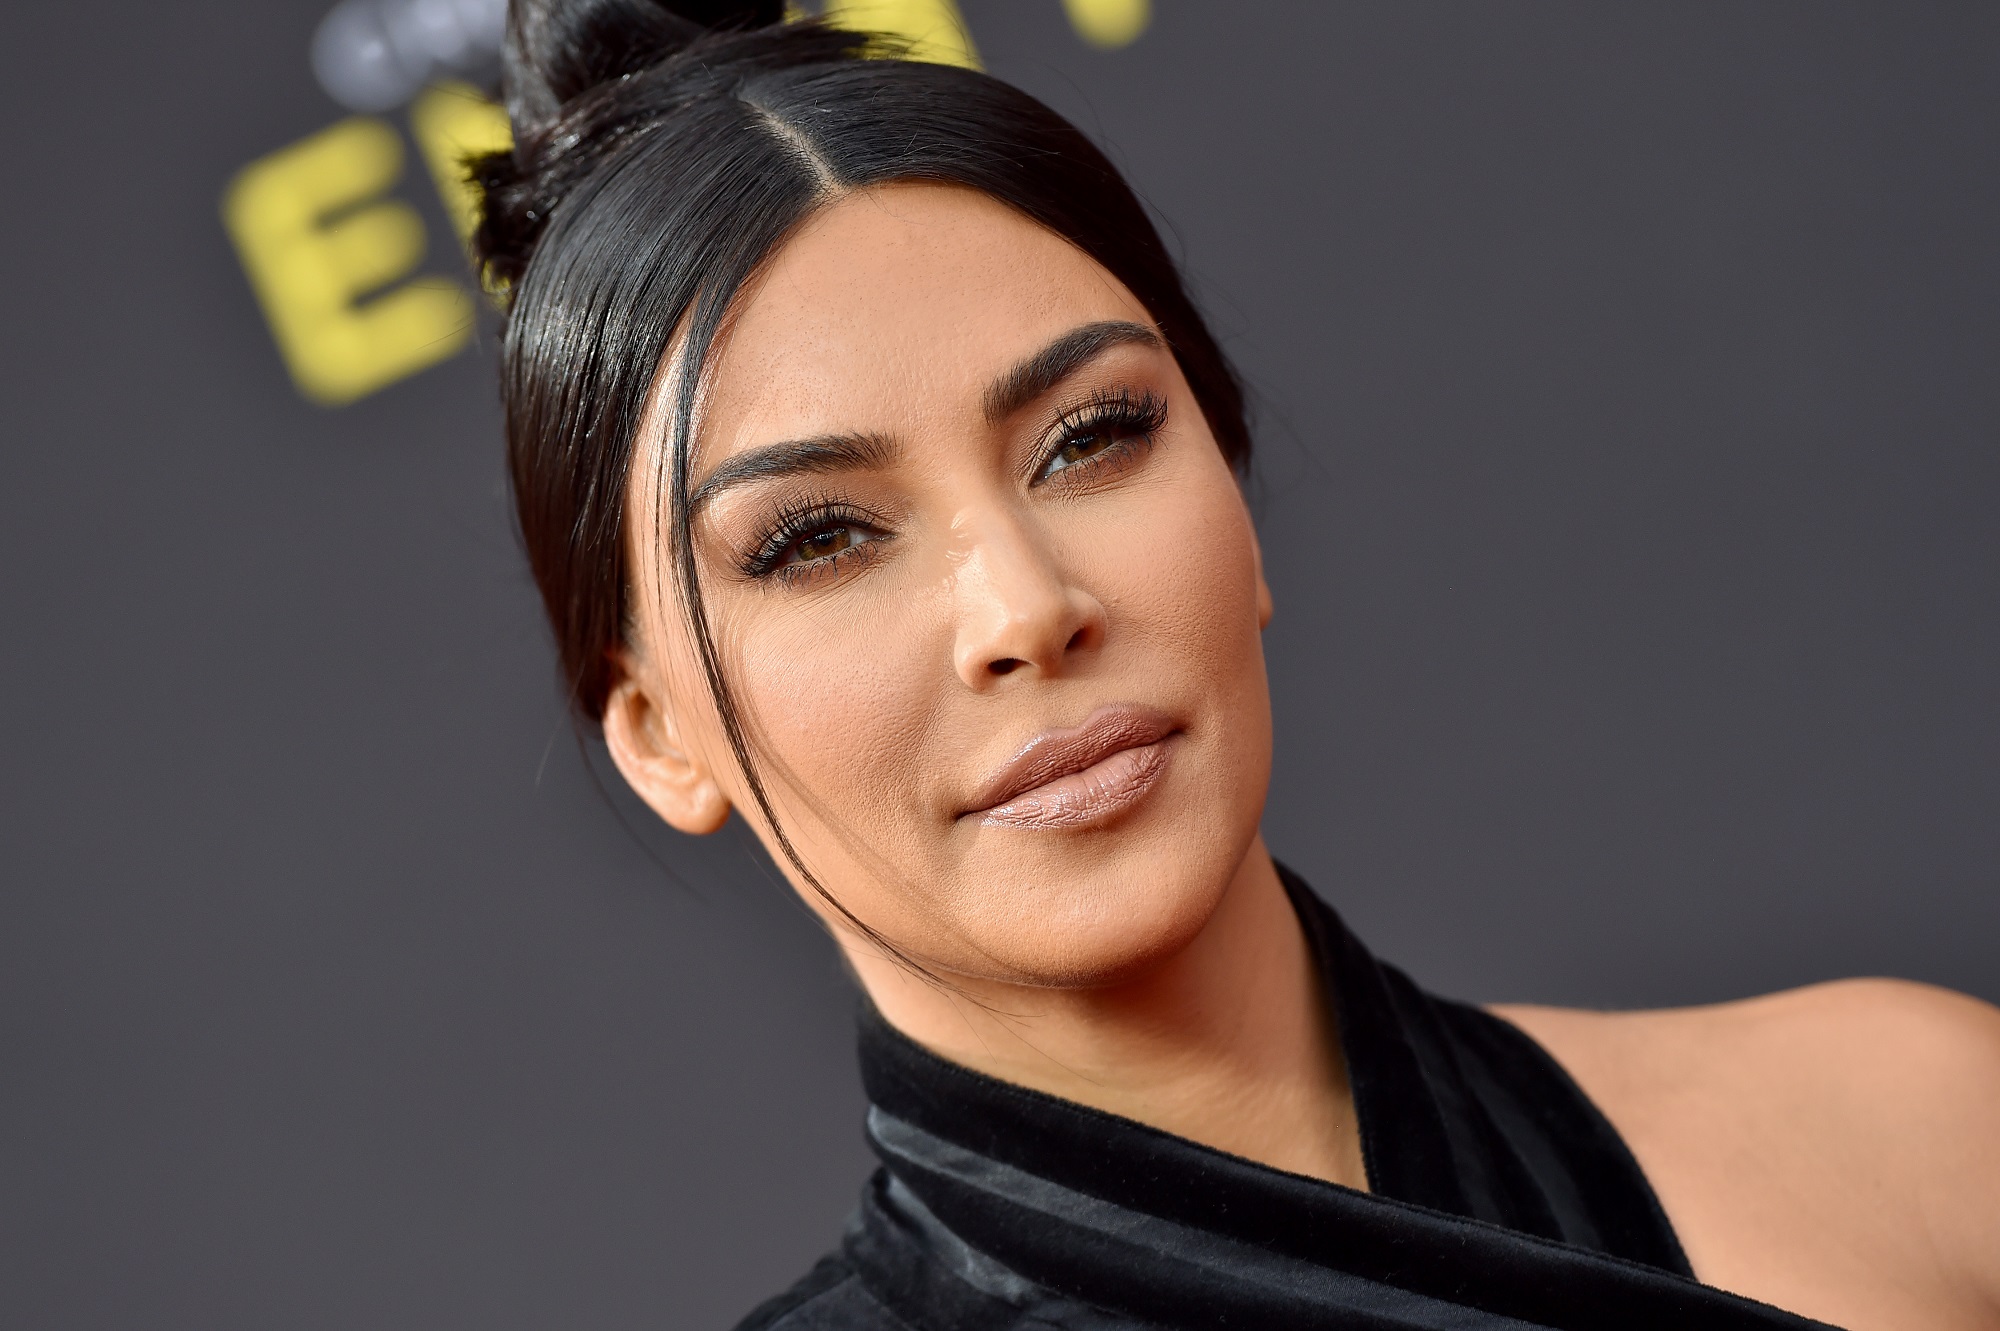 Kim Kardashian West attends the 2019 Creative Arts Emmy Awards on September 14, 2019 in Los Angeles, California.